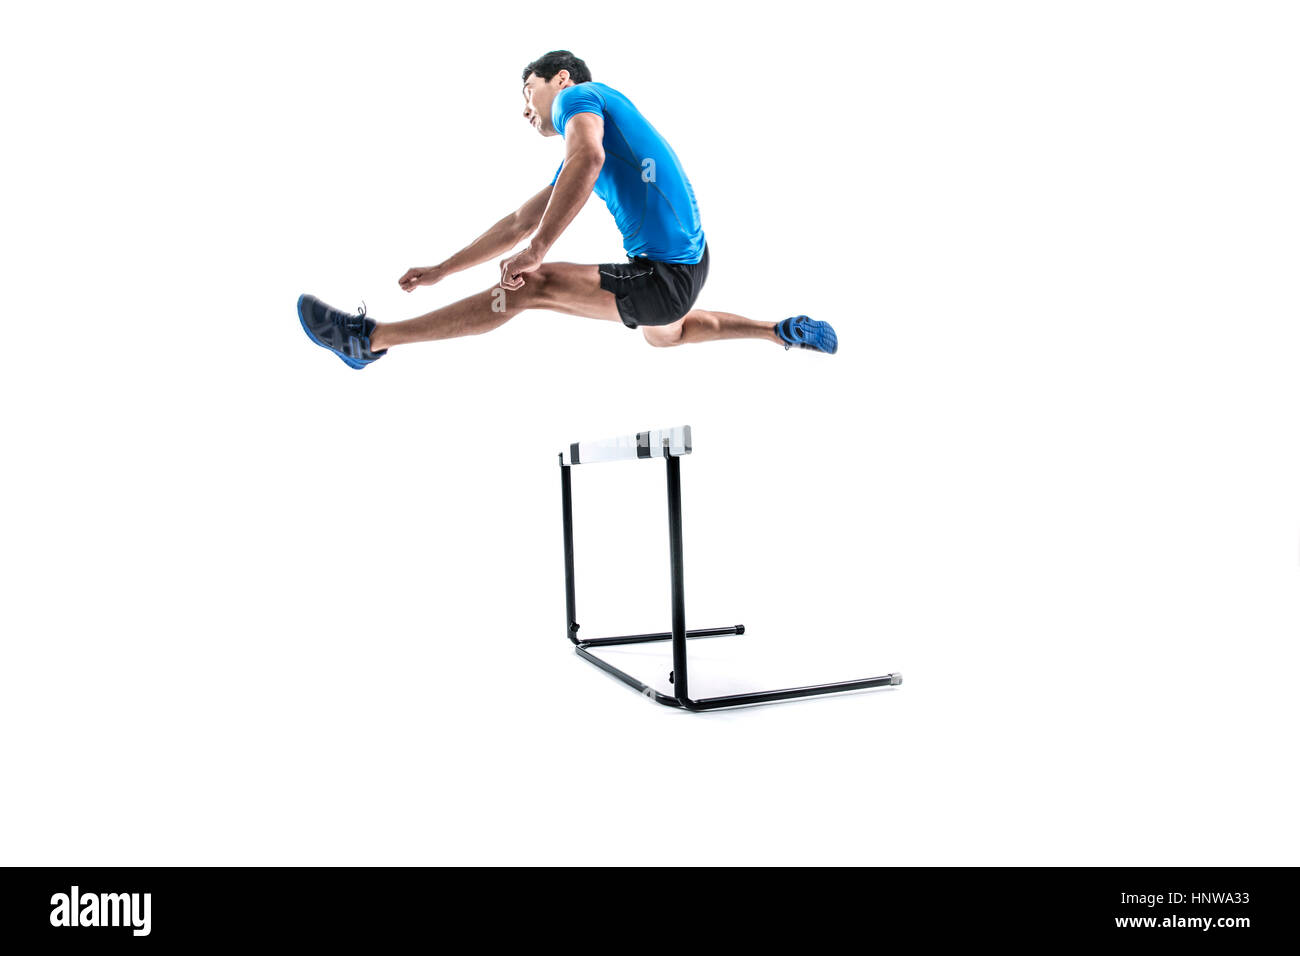 Male athlete jumping over obstacle Stock Photo